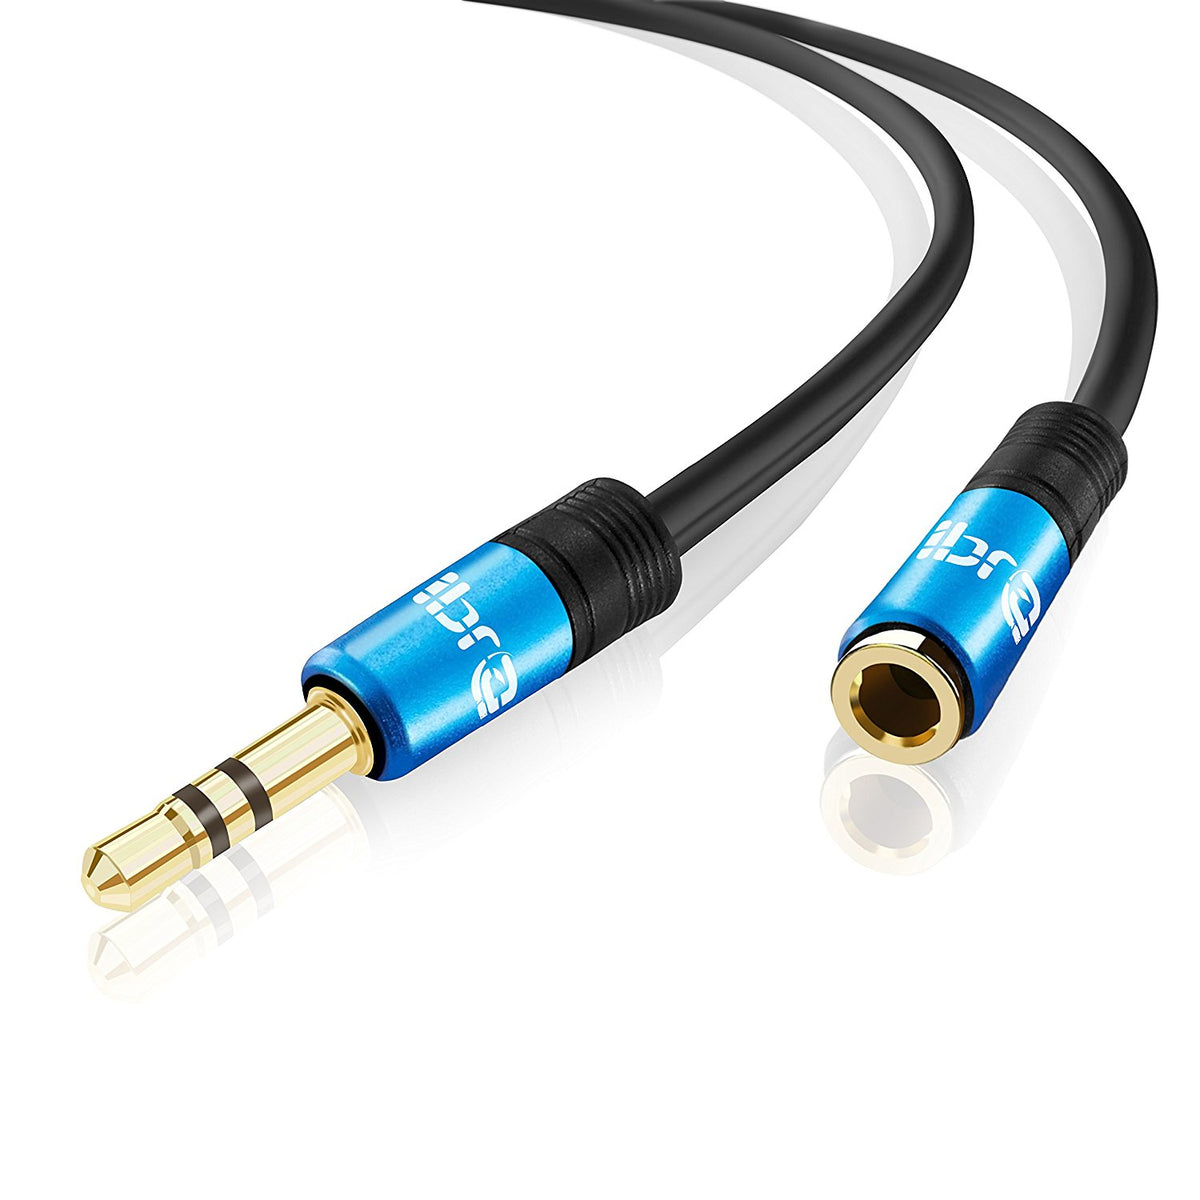 IBRA 1M Stereo Jack Extension Cable 3.5mm Male > 3.5mm Female - Blue